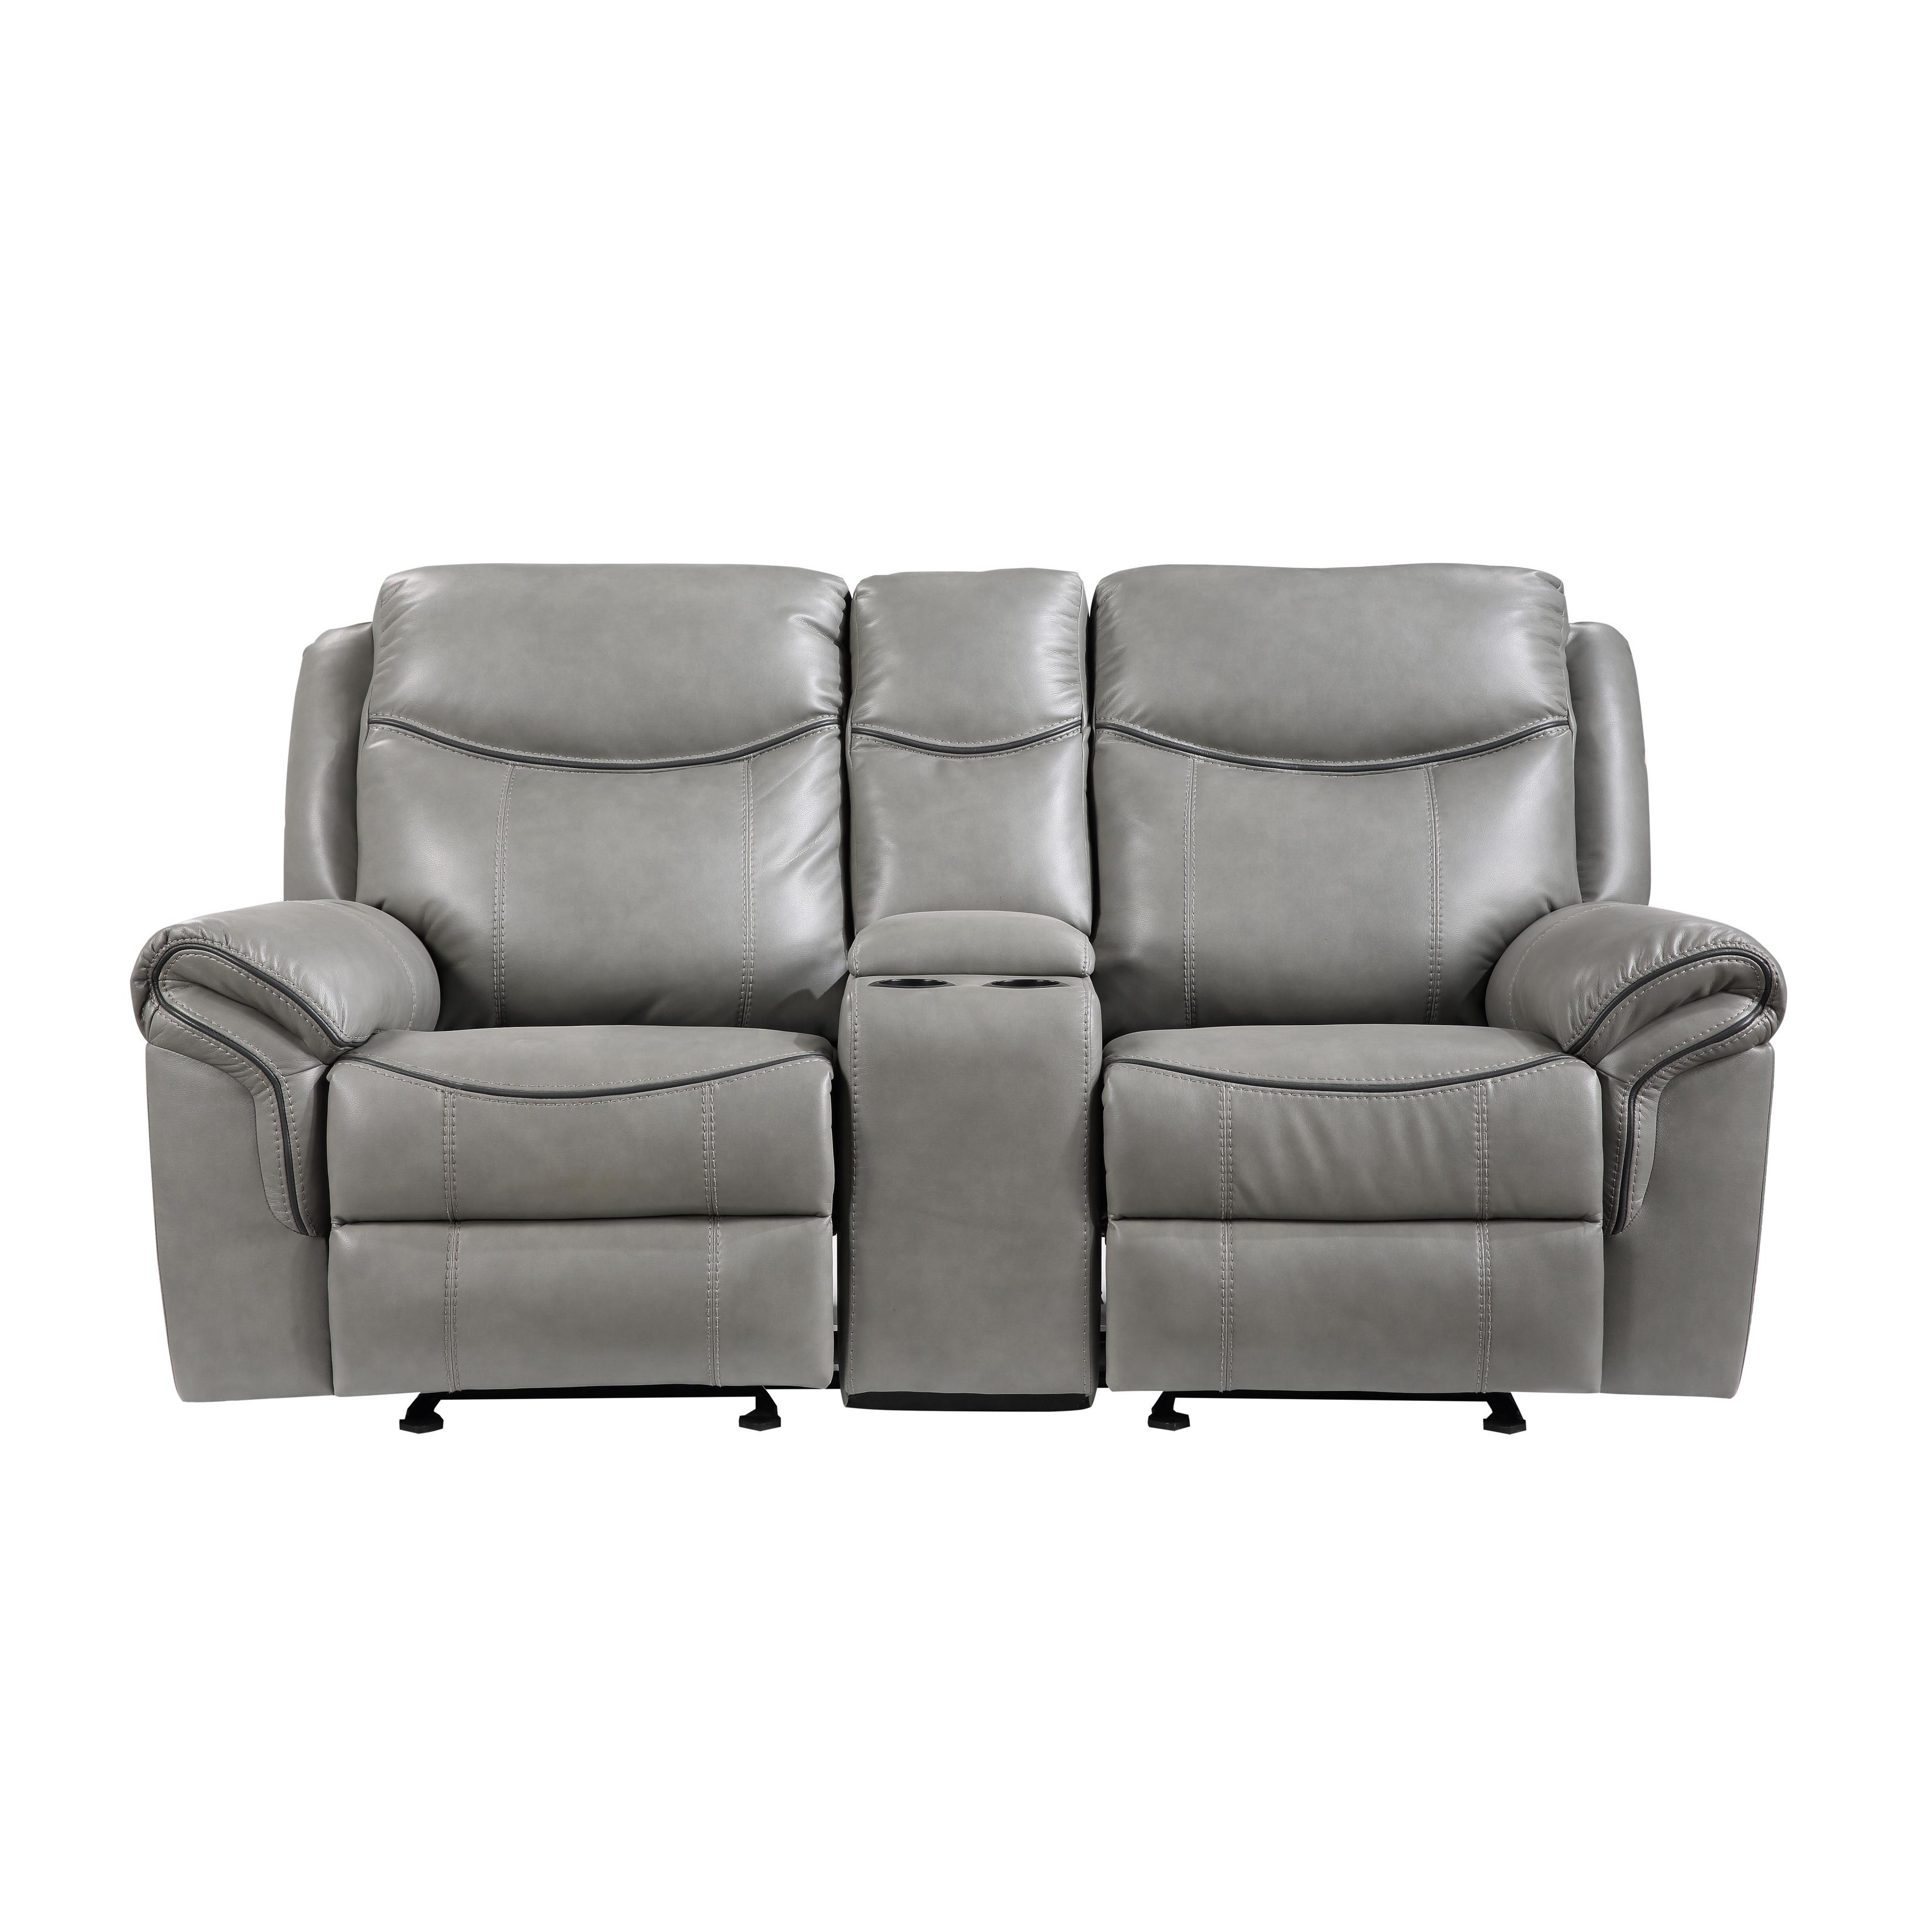 Transitional Reclining Loveseat 8206GRY-2 Aram 8206GRY-2 in Gray Faux Leather